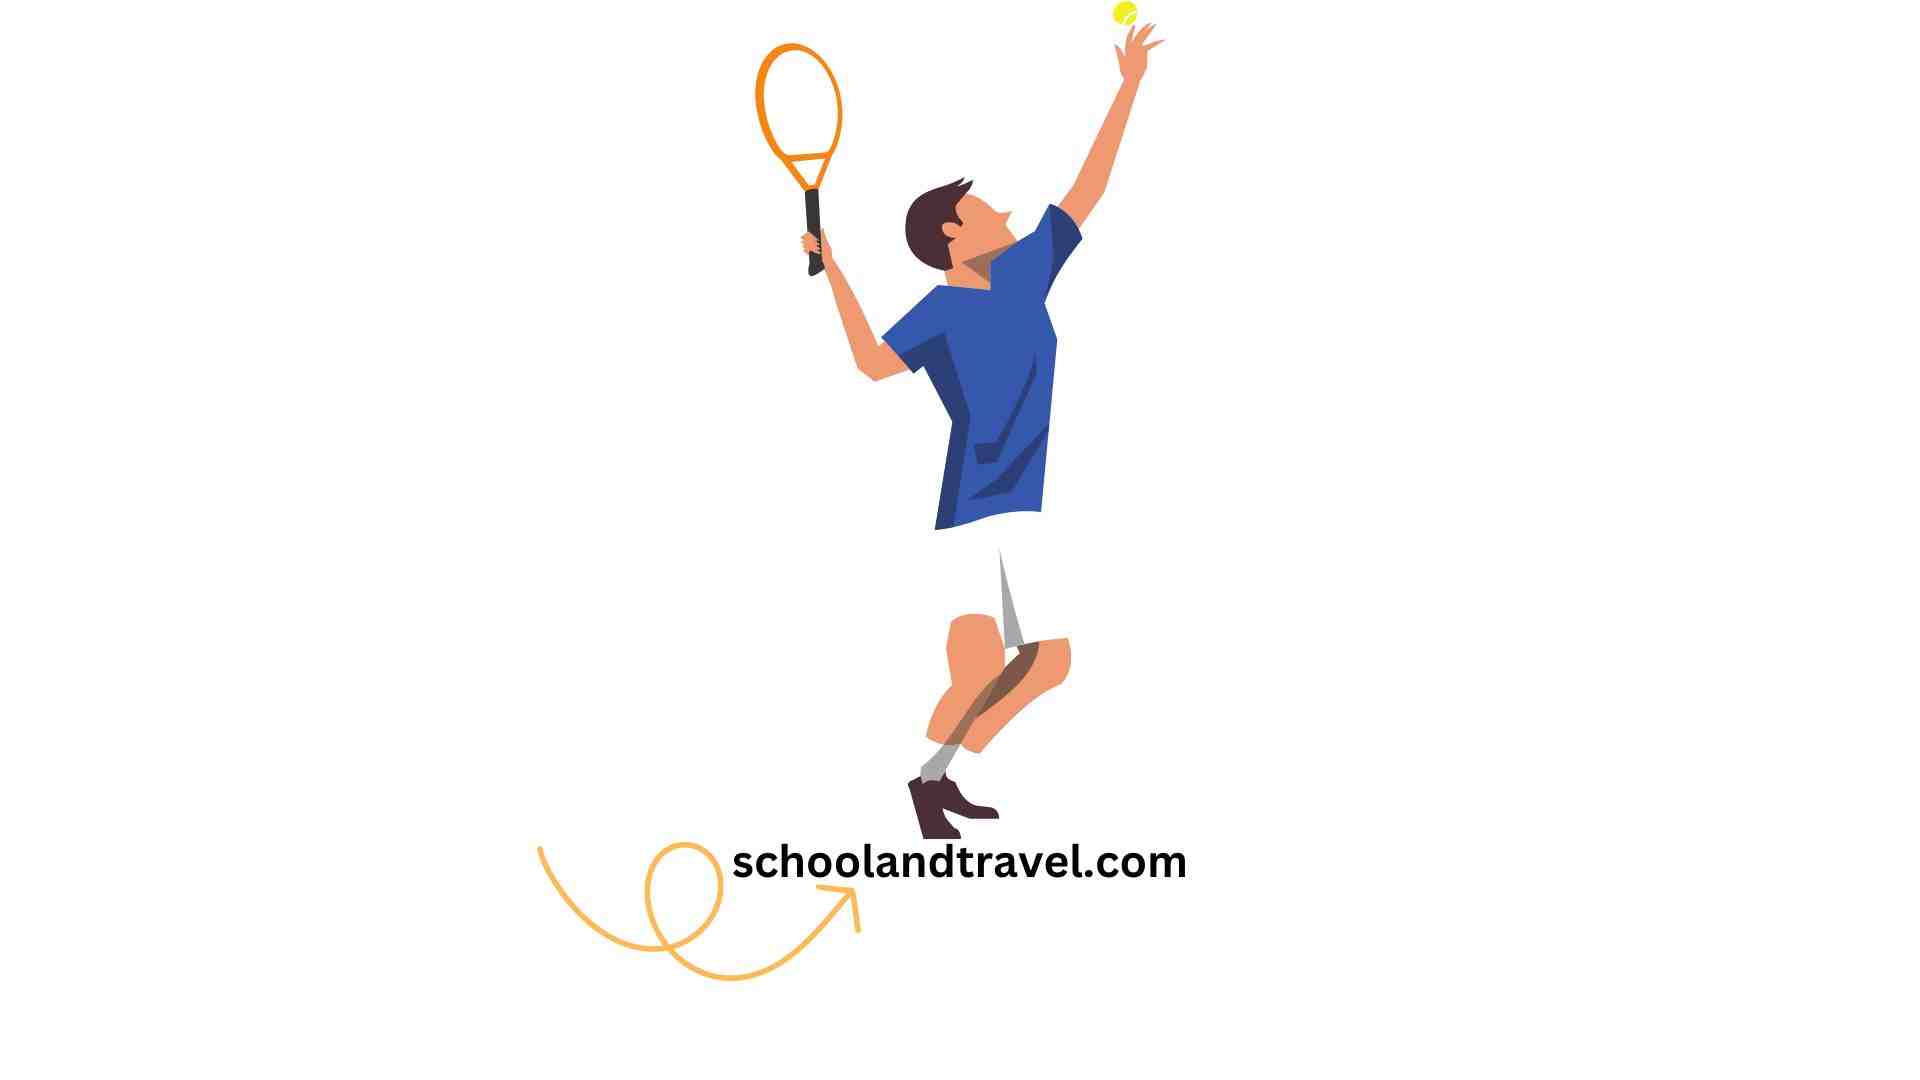 How to Become a Professional Tennis Player